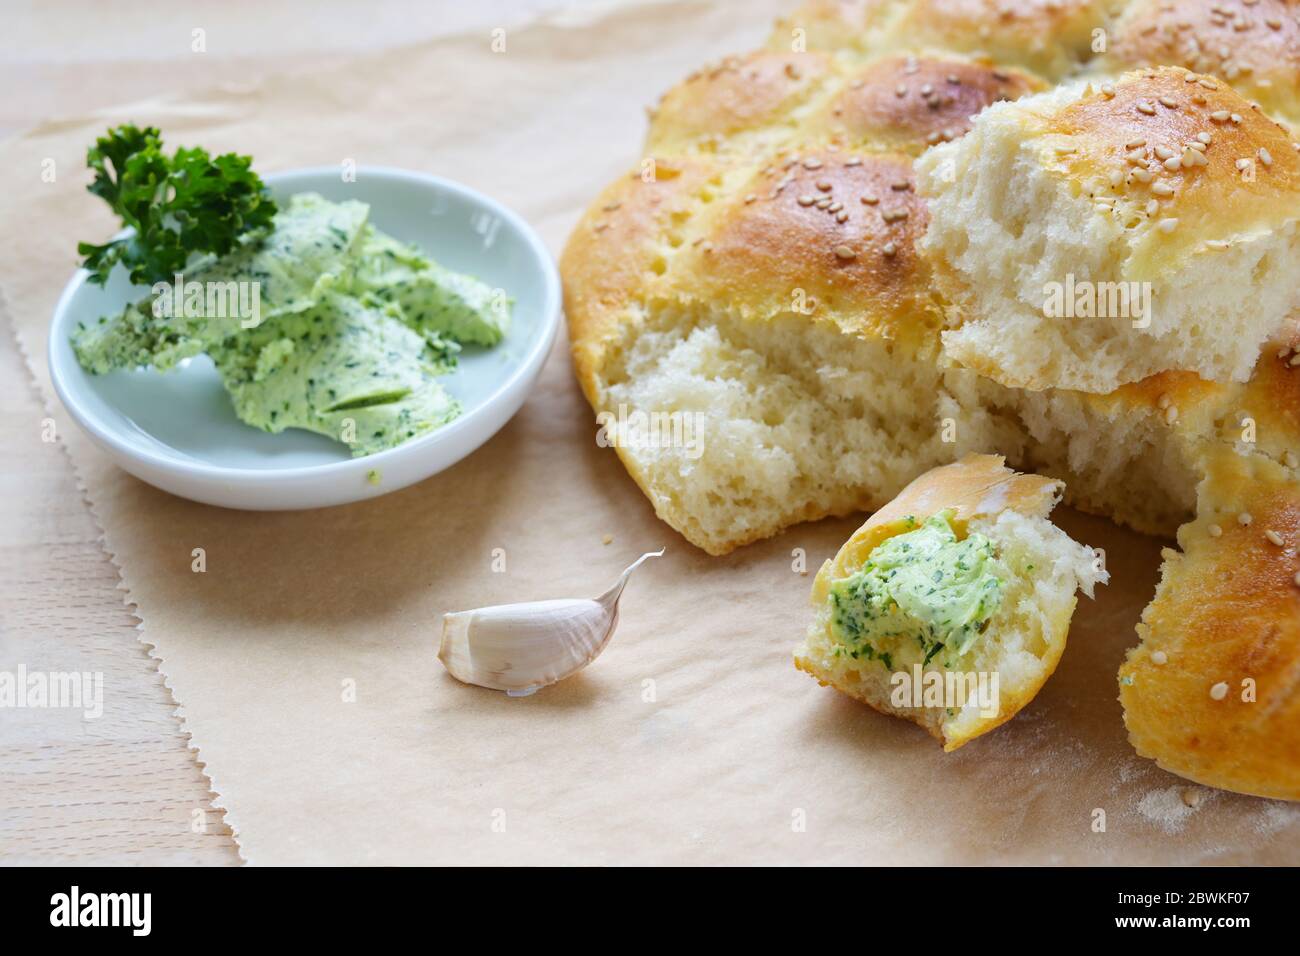 freshly baked flat bread with homemade herbs and garlic butter, selected focus, narrow depth of field Stock Photo